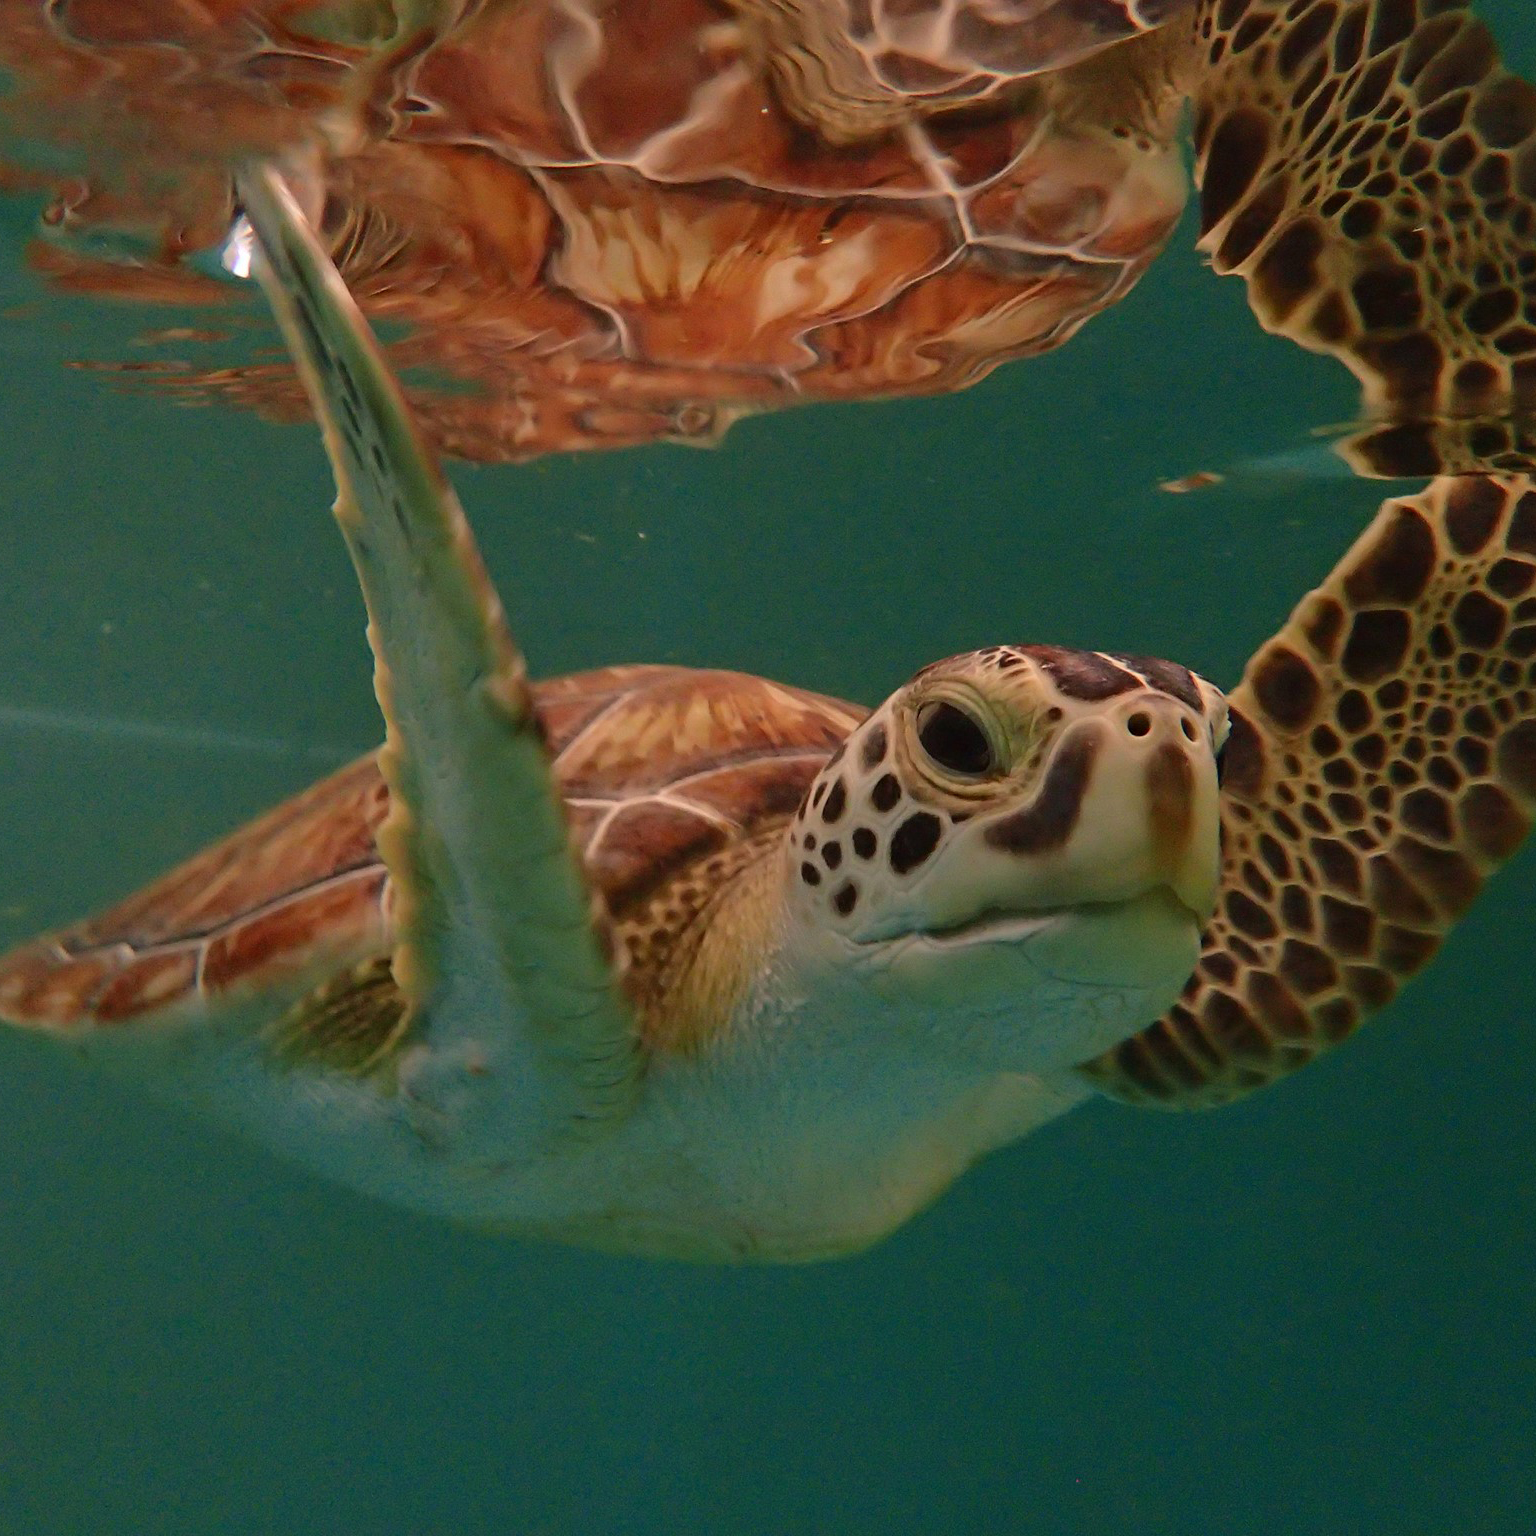 Evenings at Whitney on June 14:  Emerging Research and Conservation of Sea Turtles - in Honor of World Sea Turtle Day 